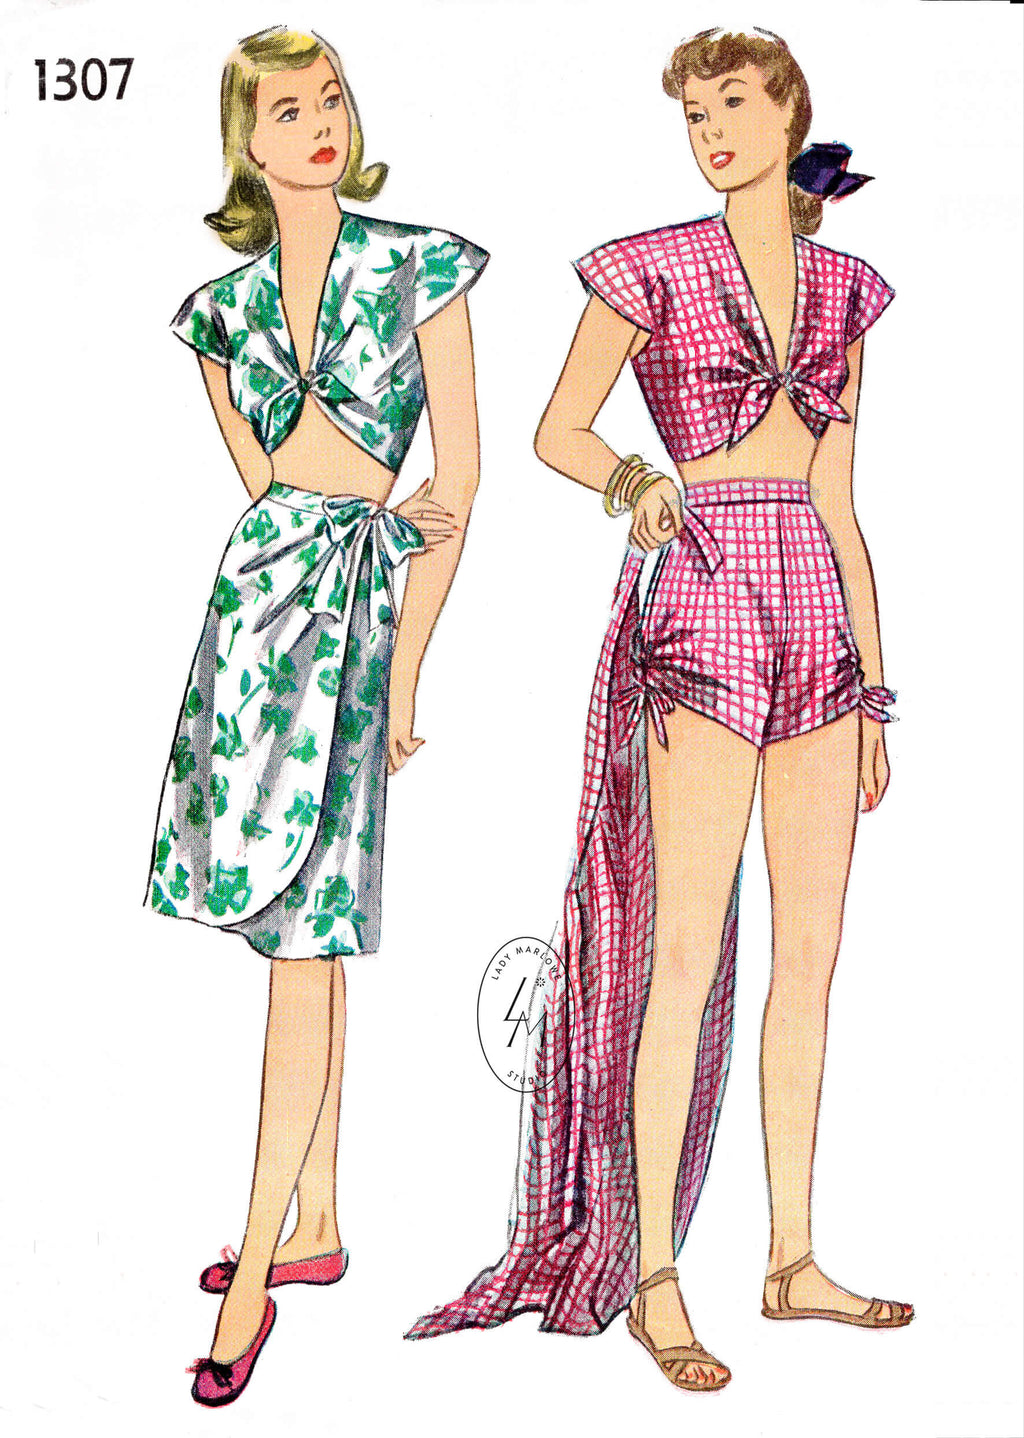 Simplicity 1307 1940s crop top, wrap skirt, high waisted shorts summer beachwear vintage sewing pattern reproduction